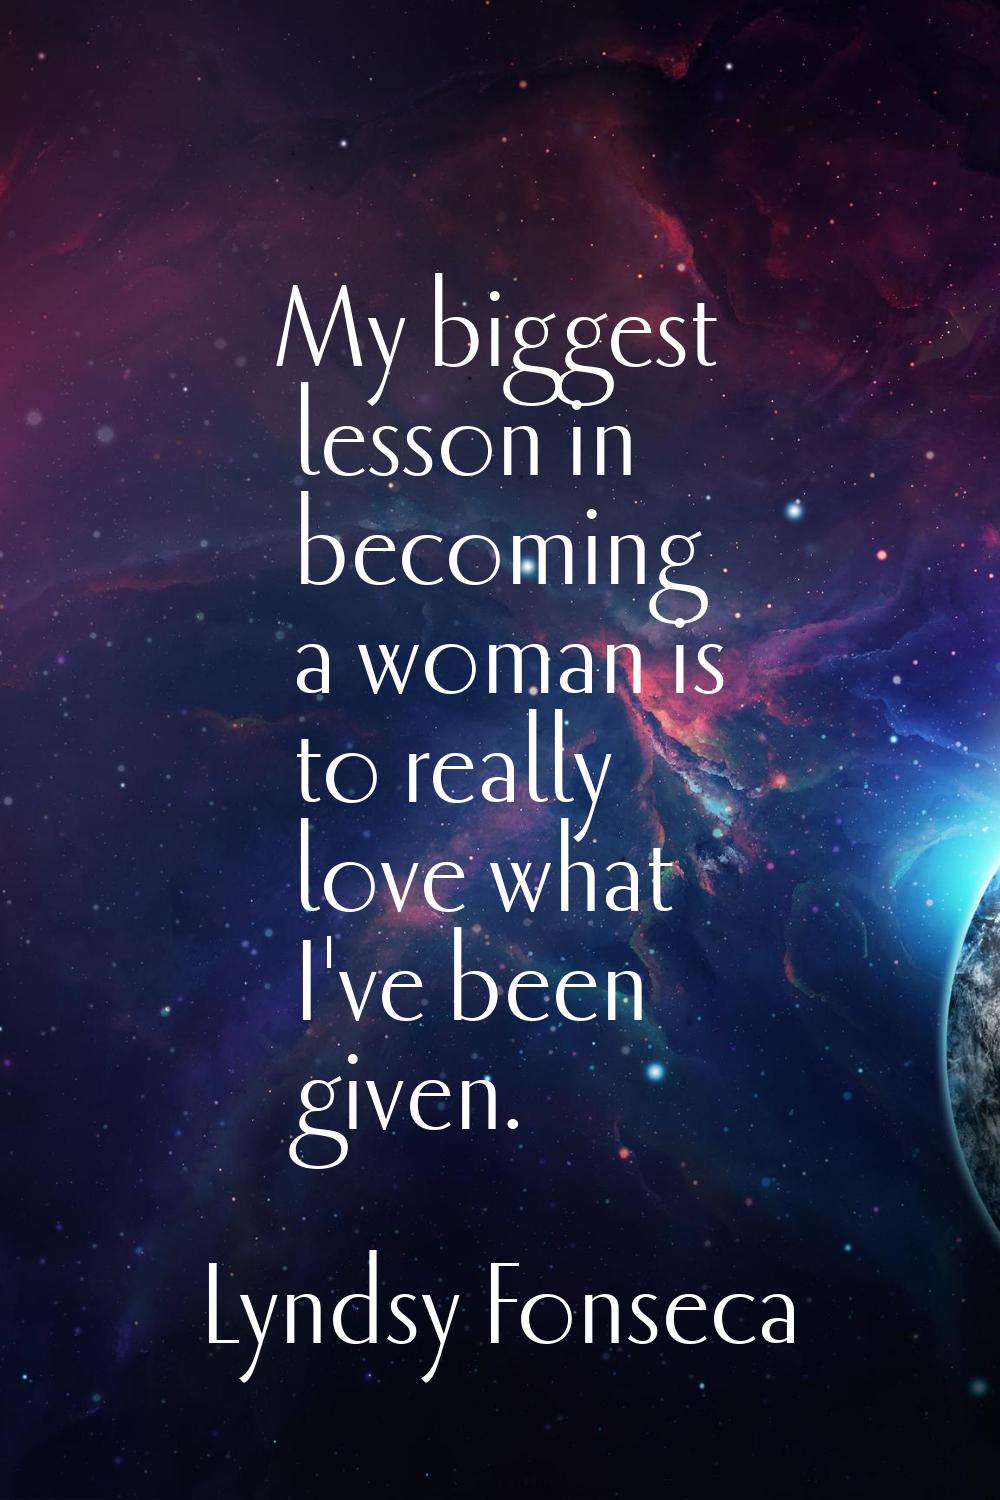 My biggest lesson in becoming a woman is to really love what I've been given.